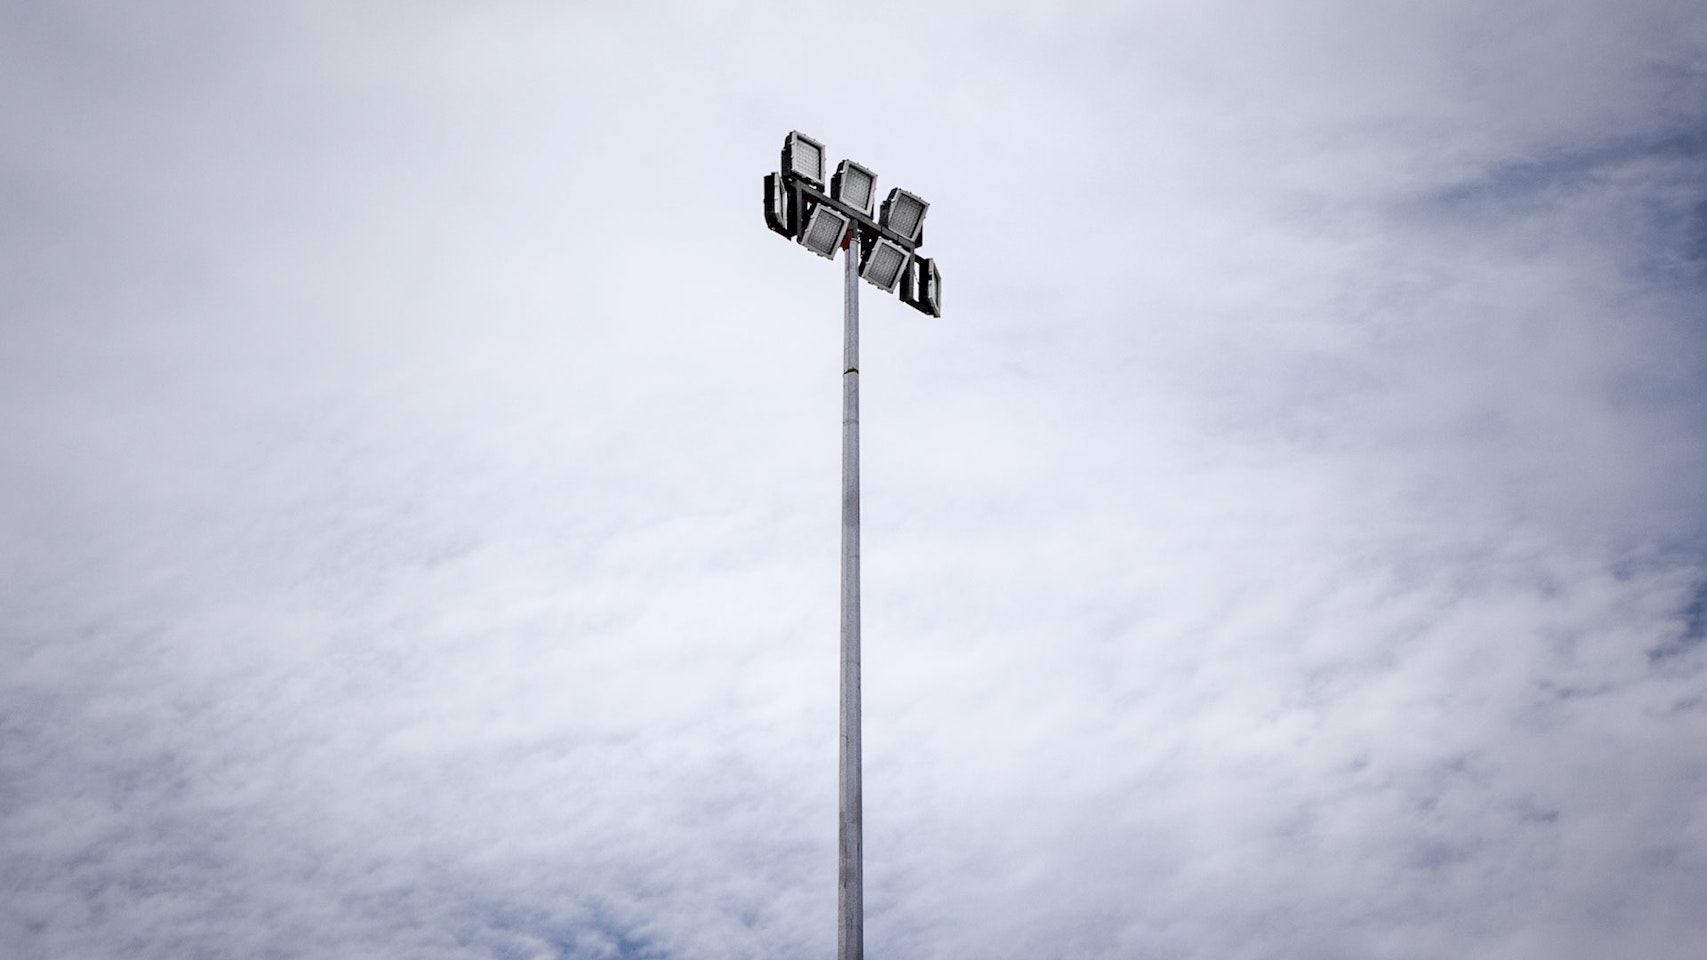 CP66 LED Flood Light in application, installed on a high mast pole on an industrial /  mine site